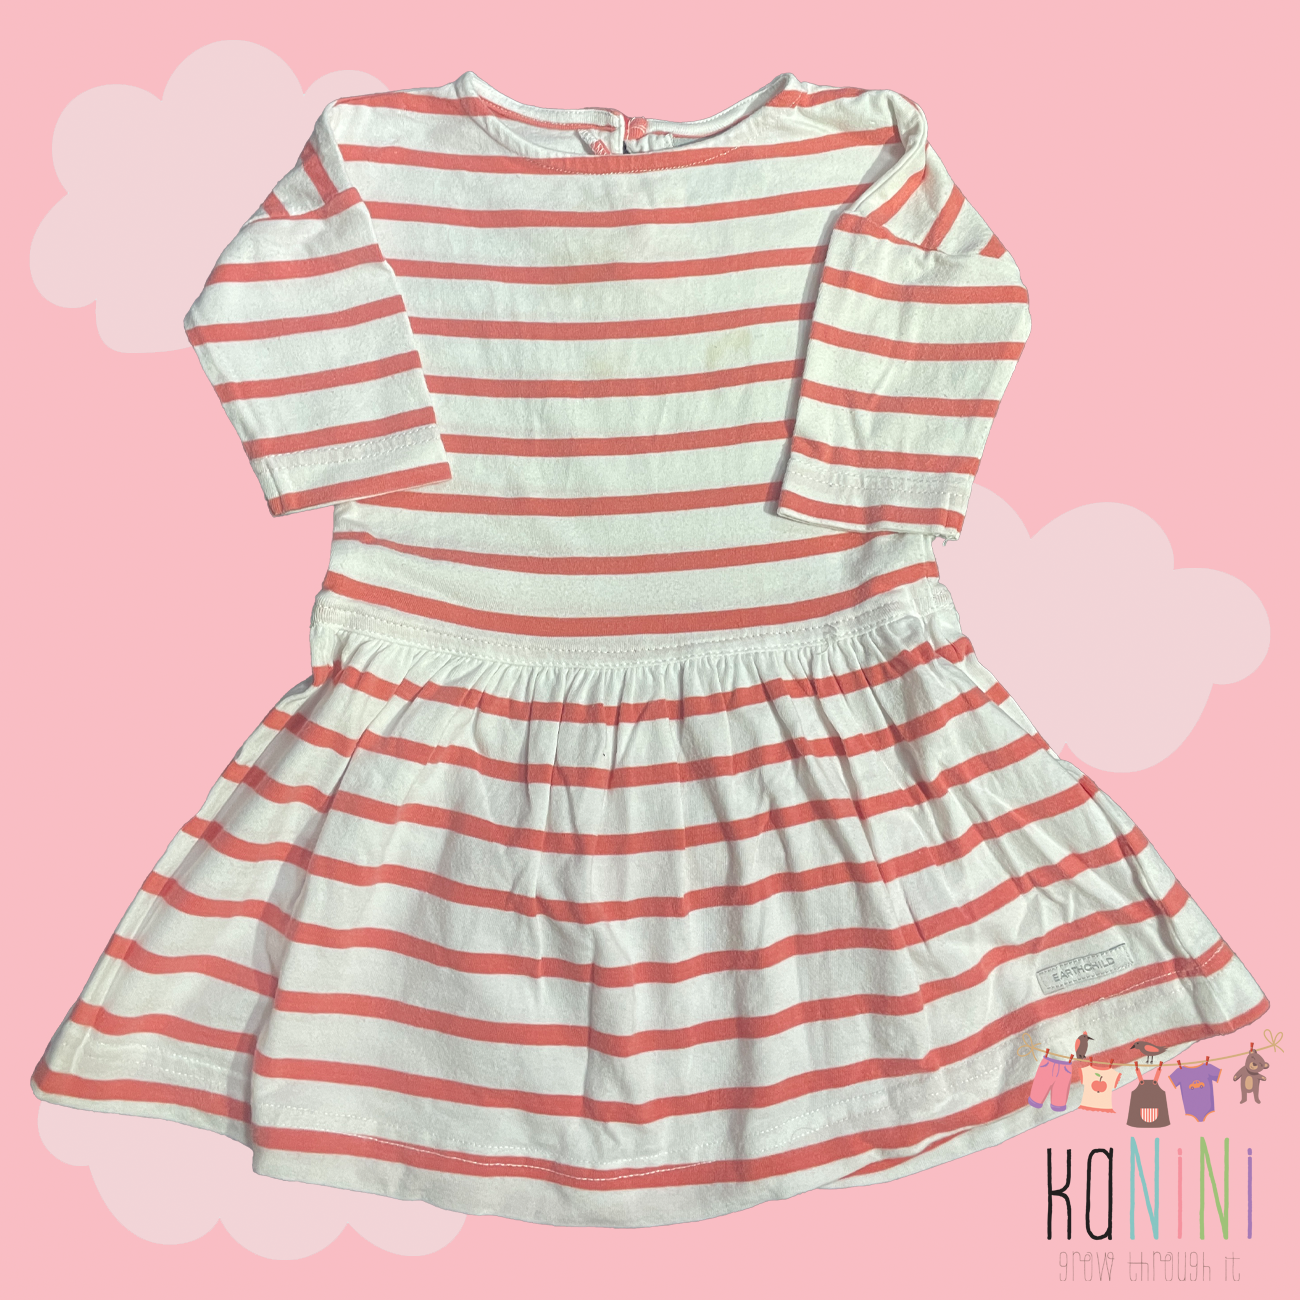 Featured image for “Earthchild 6 - 12 Months Girls Orange Striped Dress”